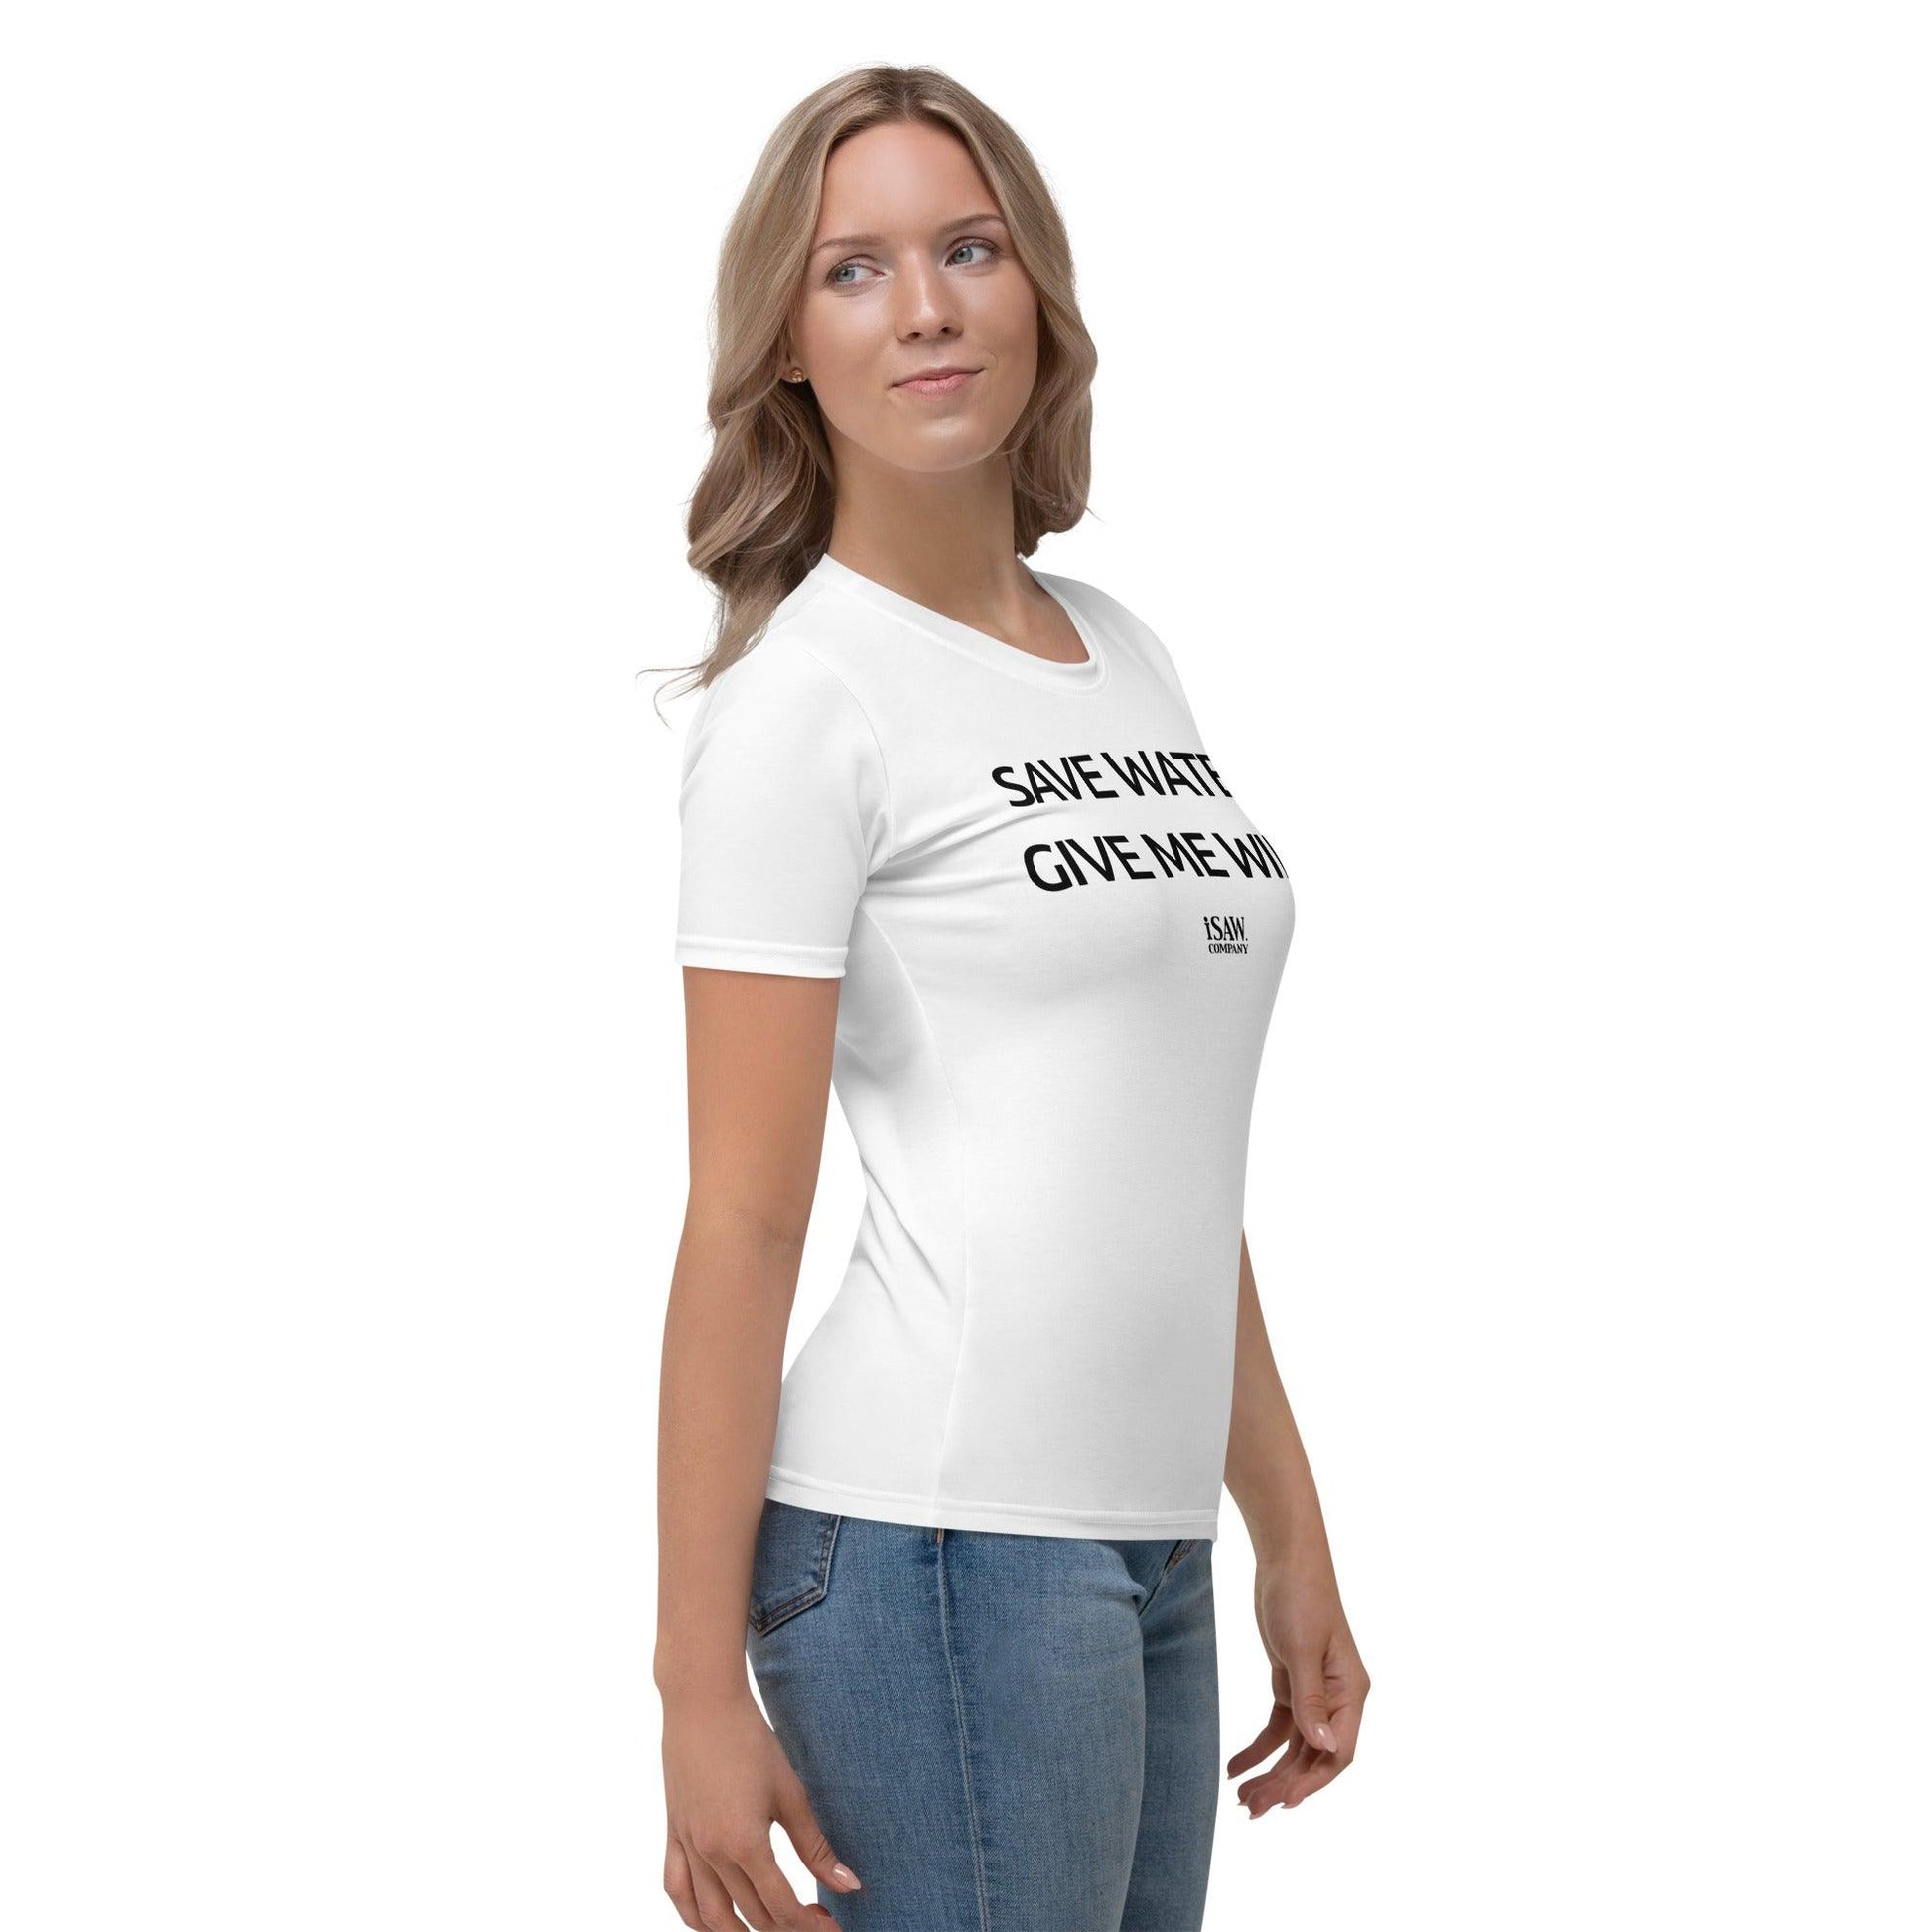 Save Water Give Me Wine - Womens White T-Shirt - iSAW Company